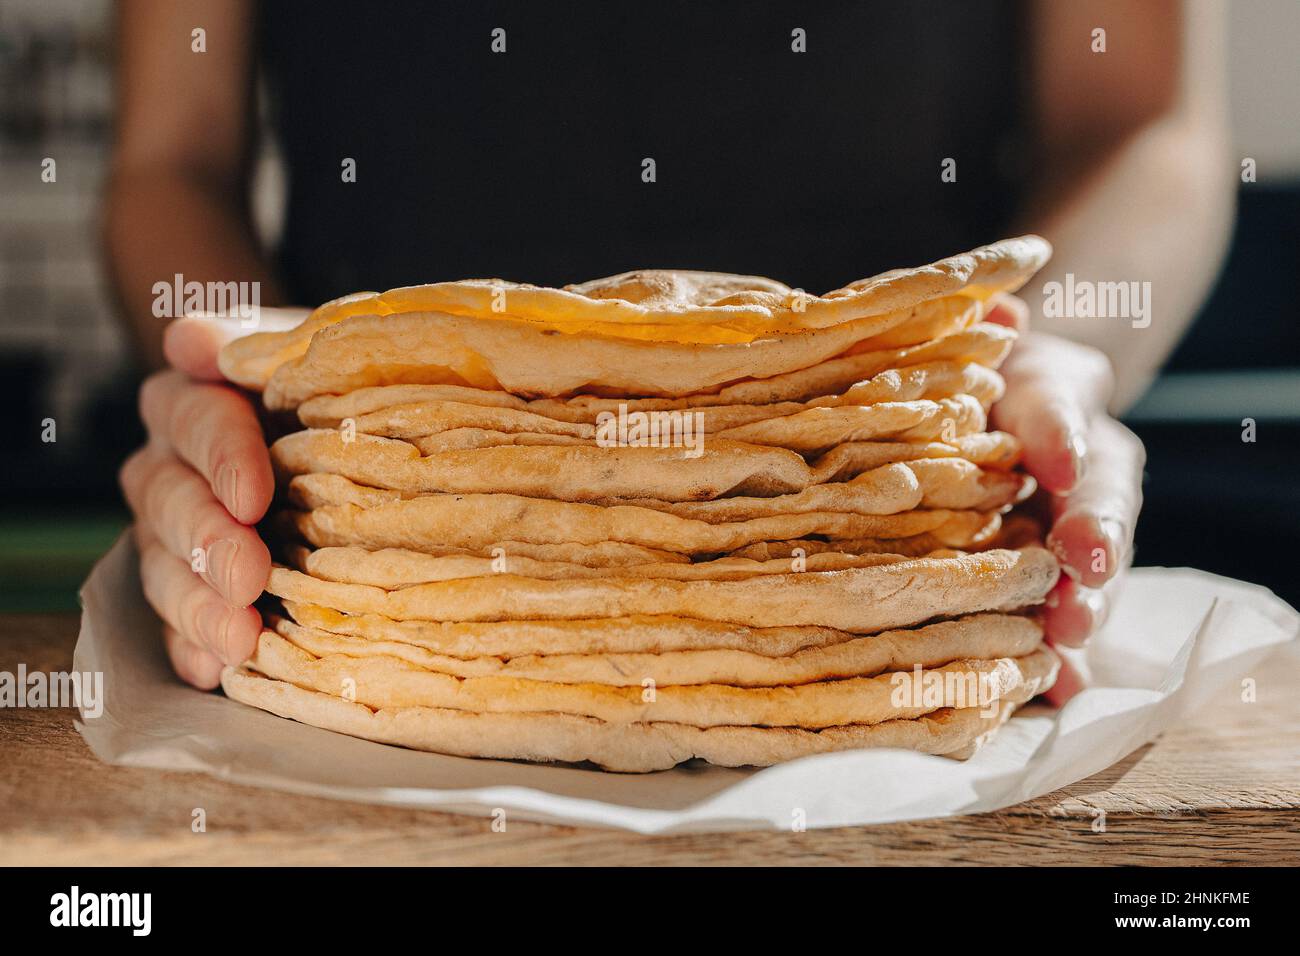 Thin round cakes of lavash are stacked, hands of cook stretch lavash forward for testing. Spanish flatbread or armenian lavash close-up Stock Photo